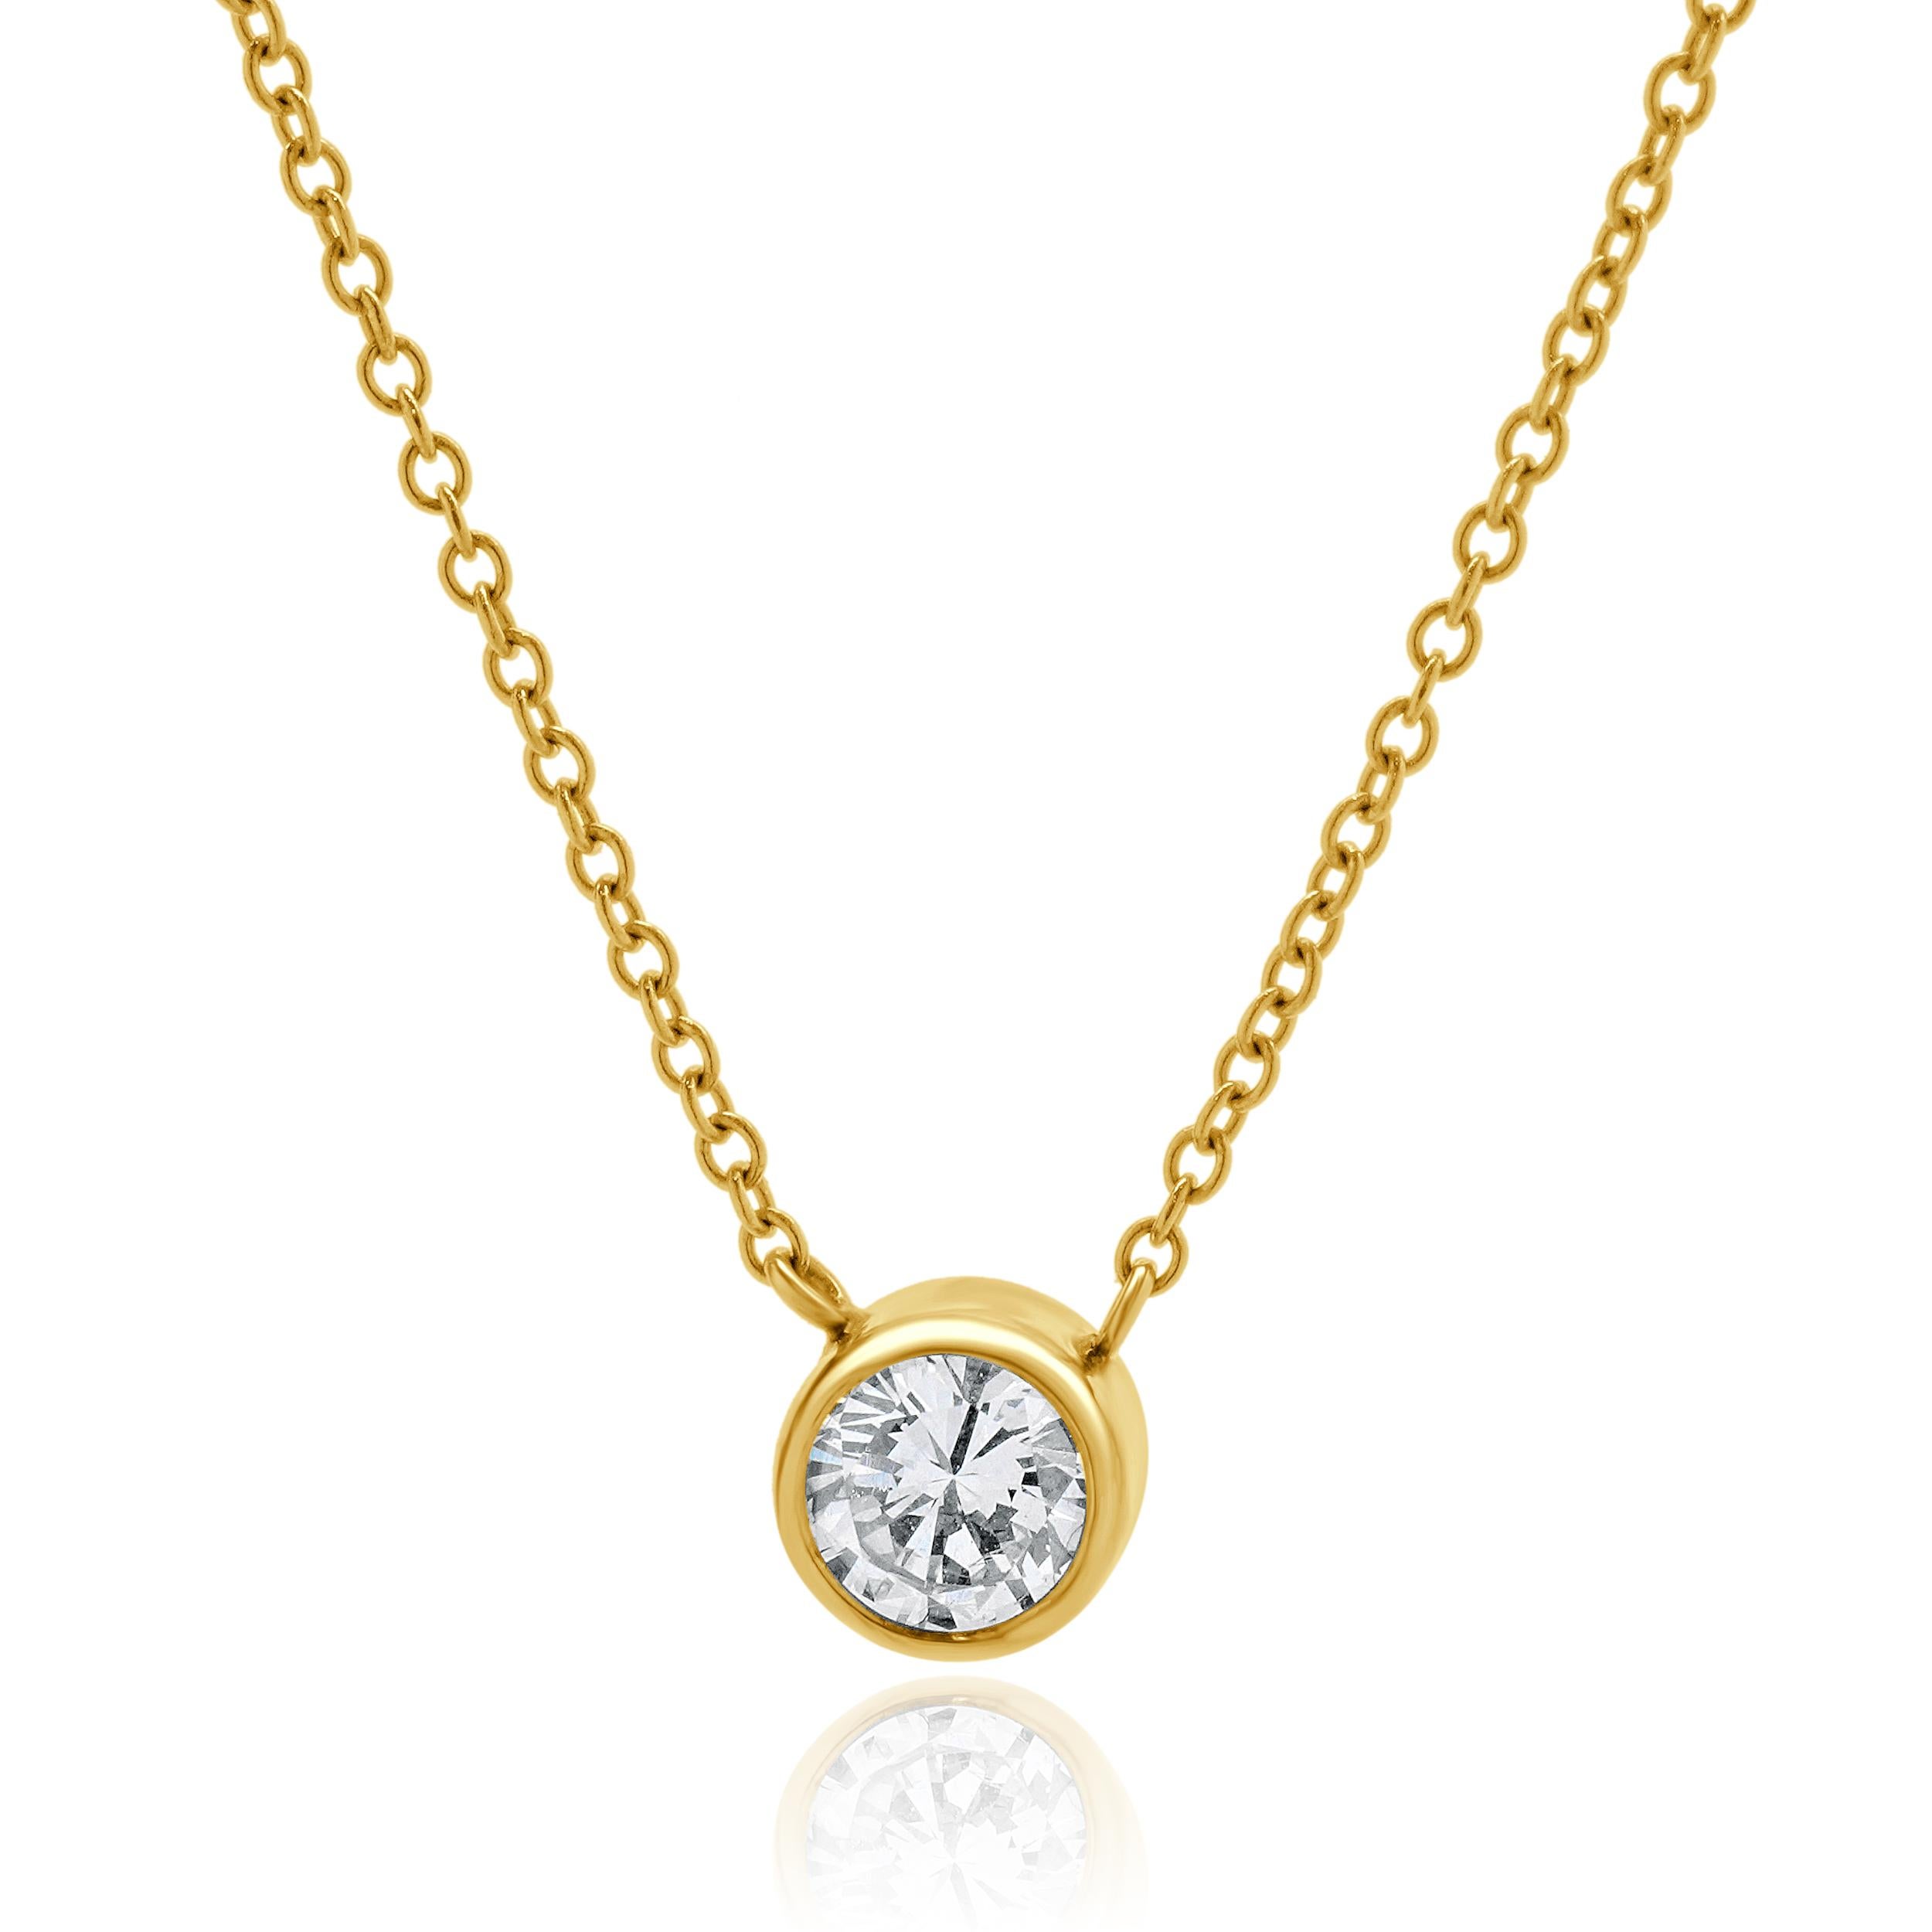 Designer: custom
Material: 14K yellow gold
Diamonds: round brilliant cut = 0.20ct
Color: H
Clarity: VS1
Dimensions: necklace measures 18-inches in length 
Weight: 2.31 grams
